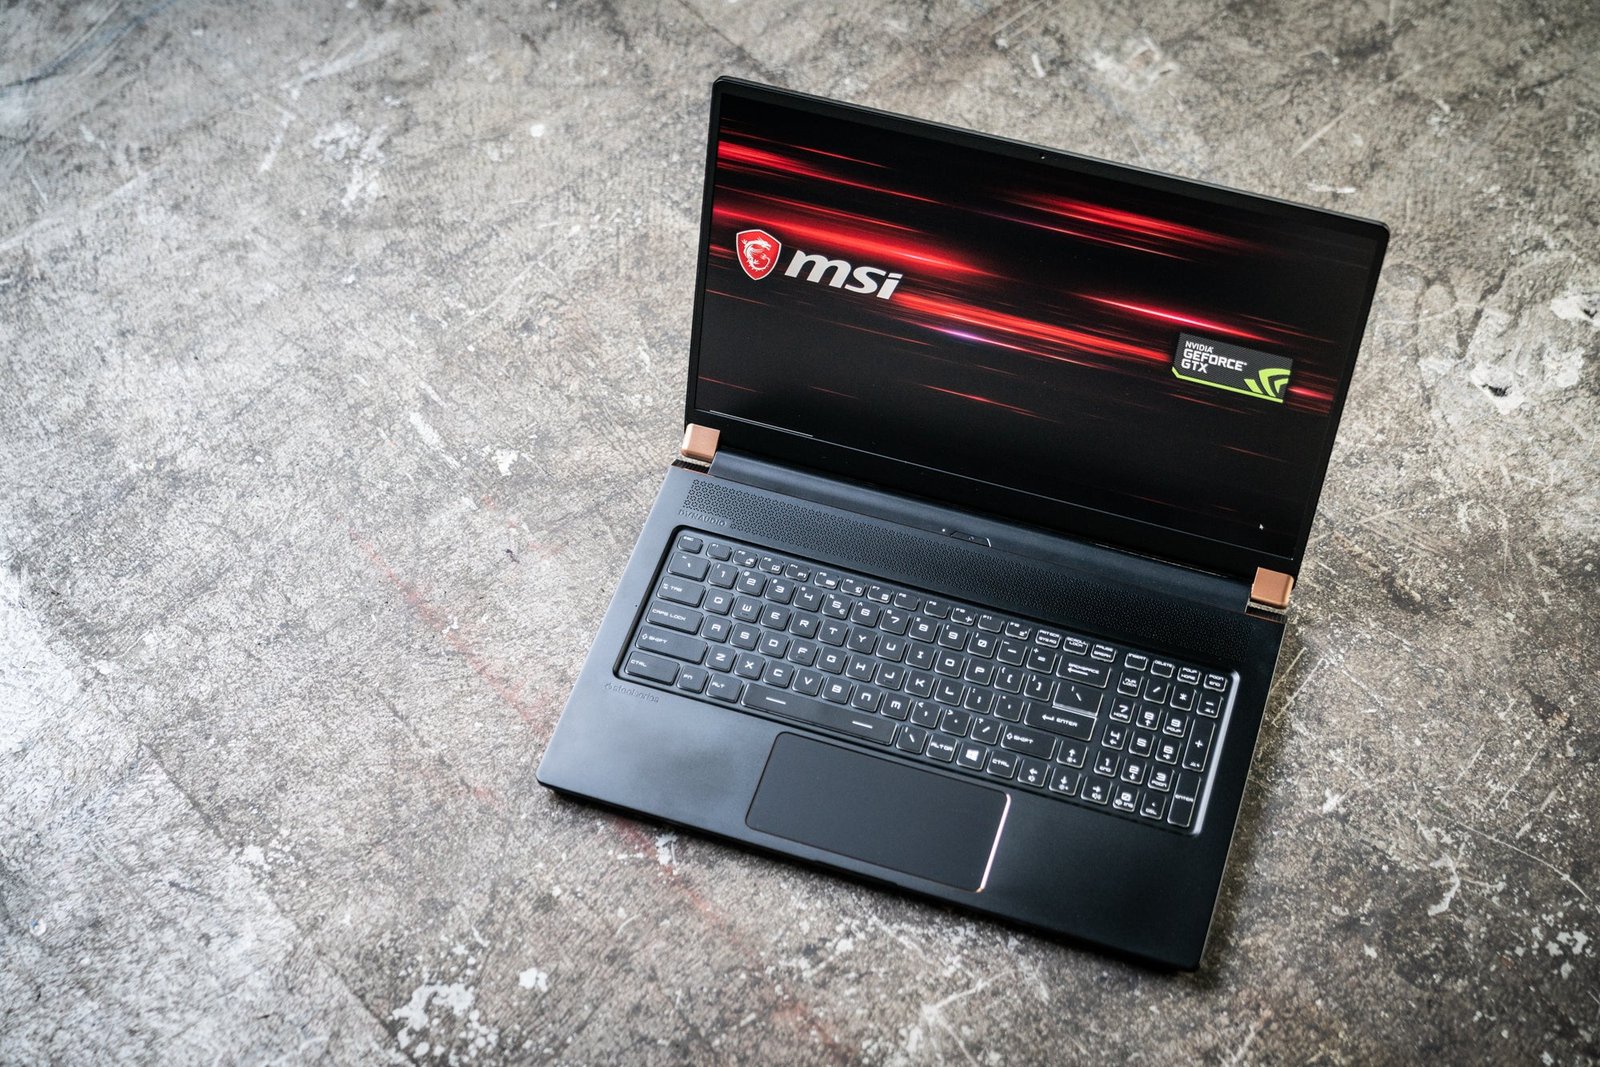 Handiest gaming laptops: What to hunt for and absolute best rated units